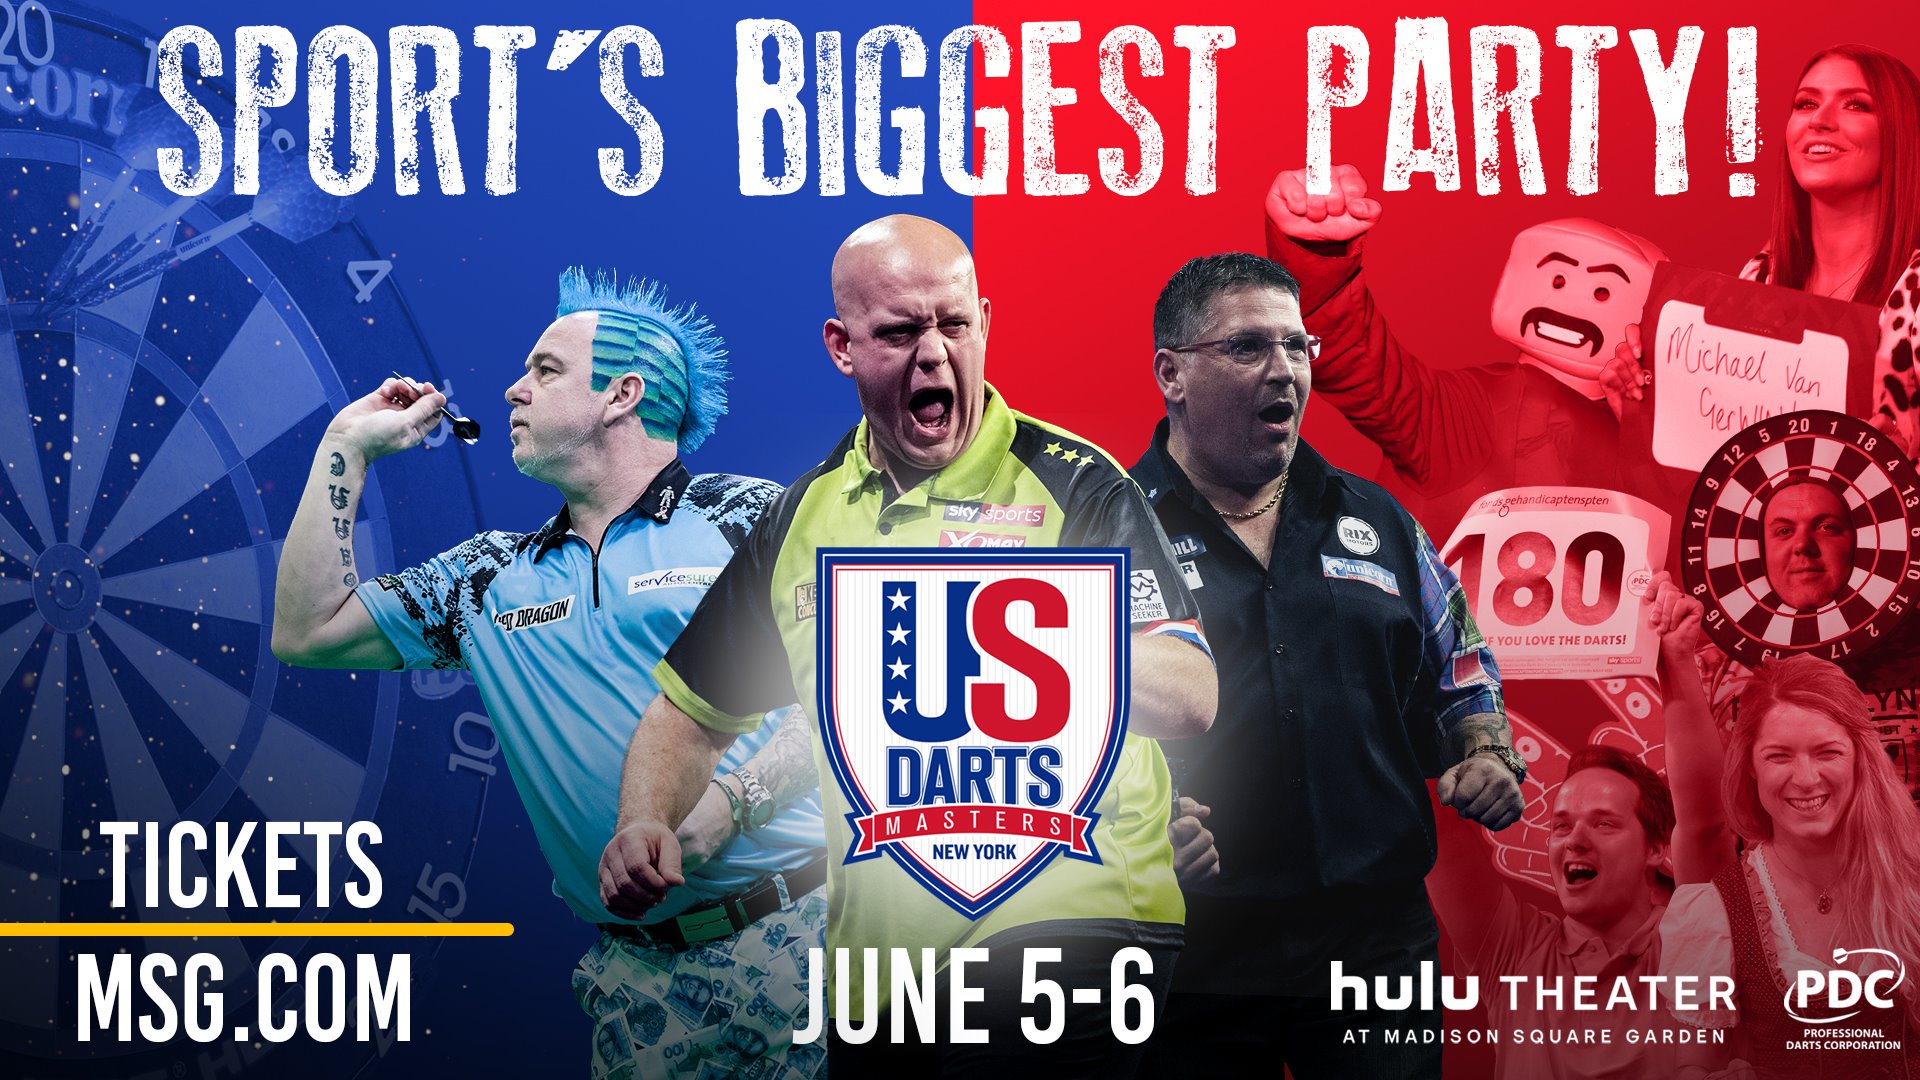 PDC Darts on Twitter: "NEW YORK! We're delighted to announce that the World  Series of Darts is heading to New York in June 2020 - the U.S. Darts Masters  & North American